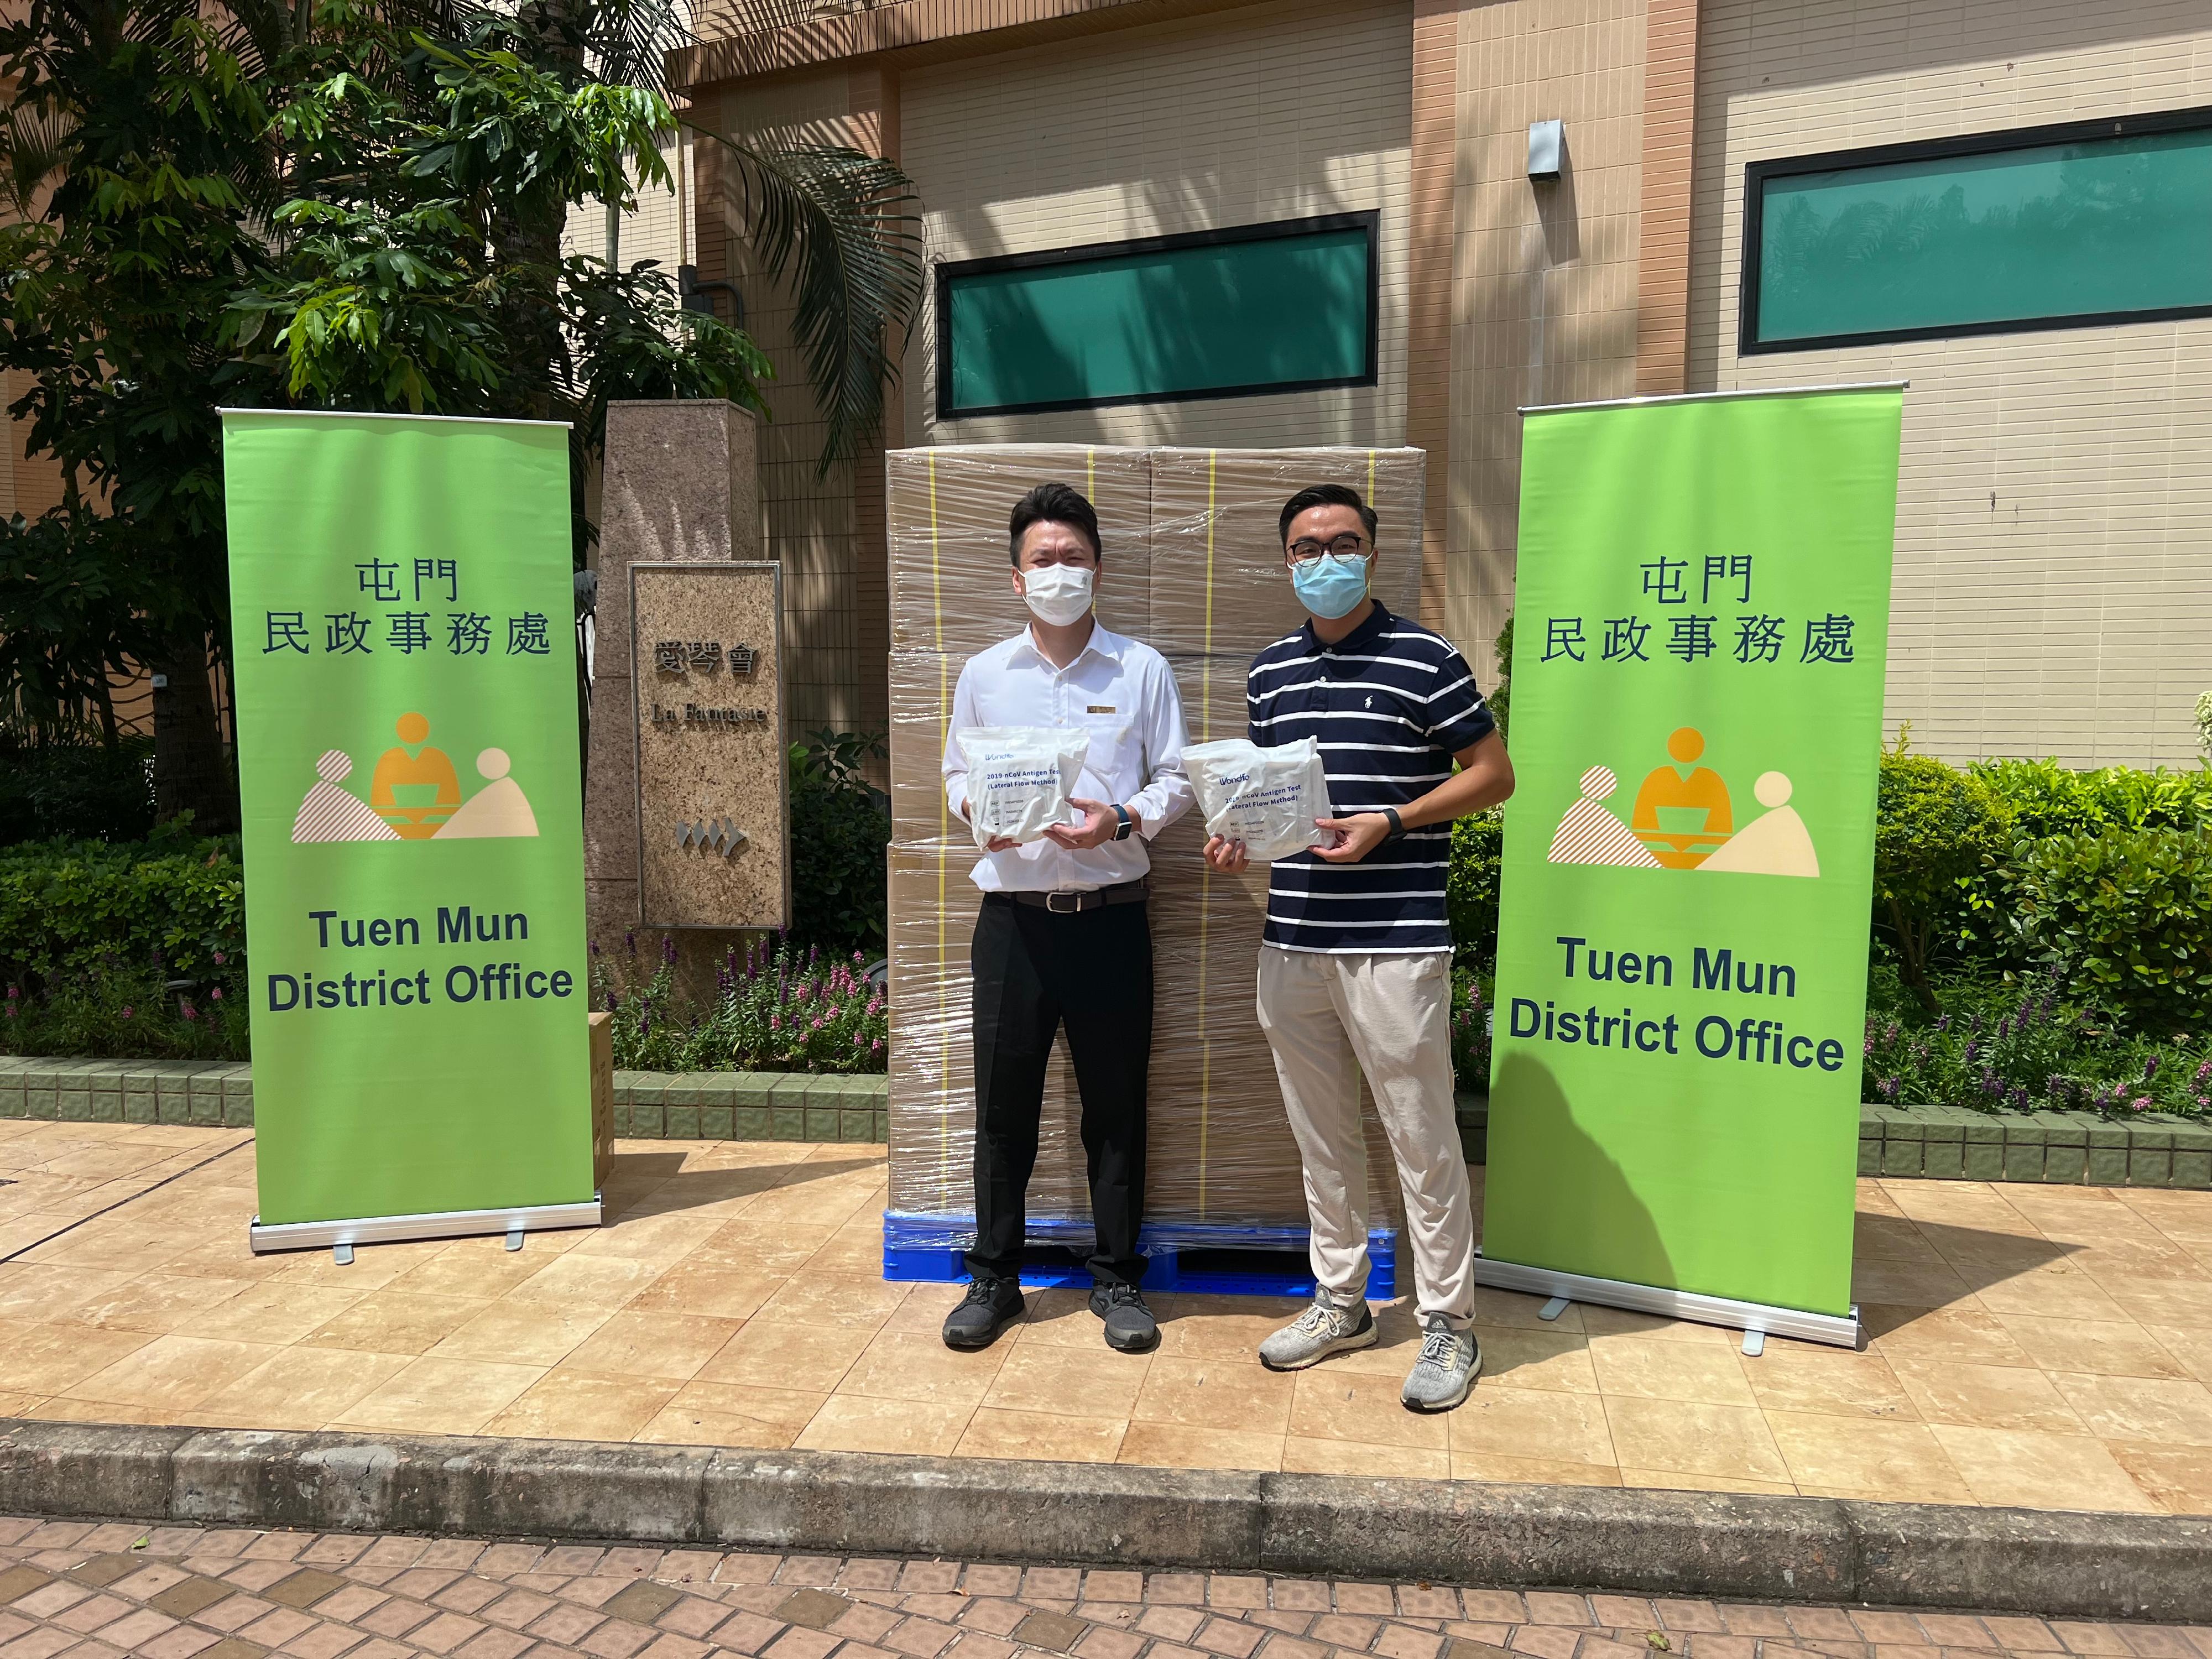 The Tuen Mun District Office today (July 19) distributed COVID-19 rapid test kits to households, cleansing workers and property management staff living and working in Aegean Coast for voluntary testing through the property management company.